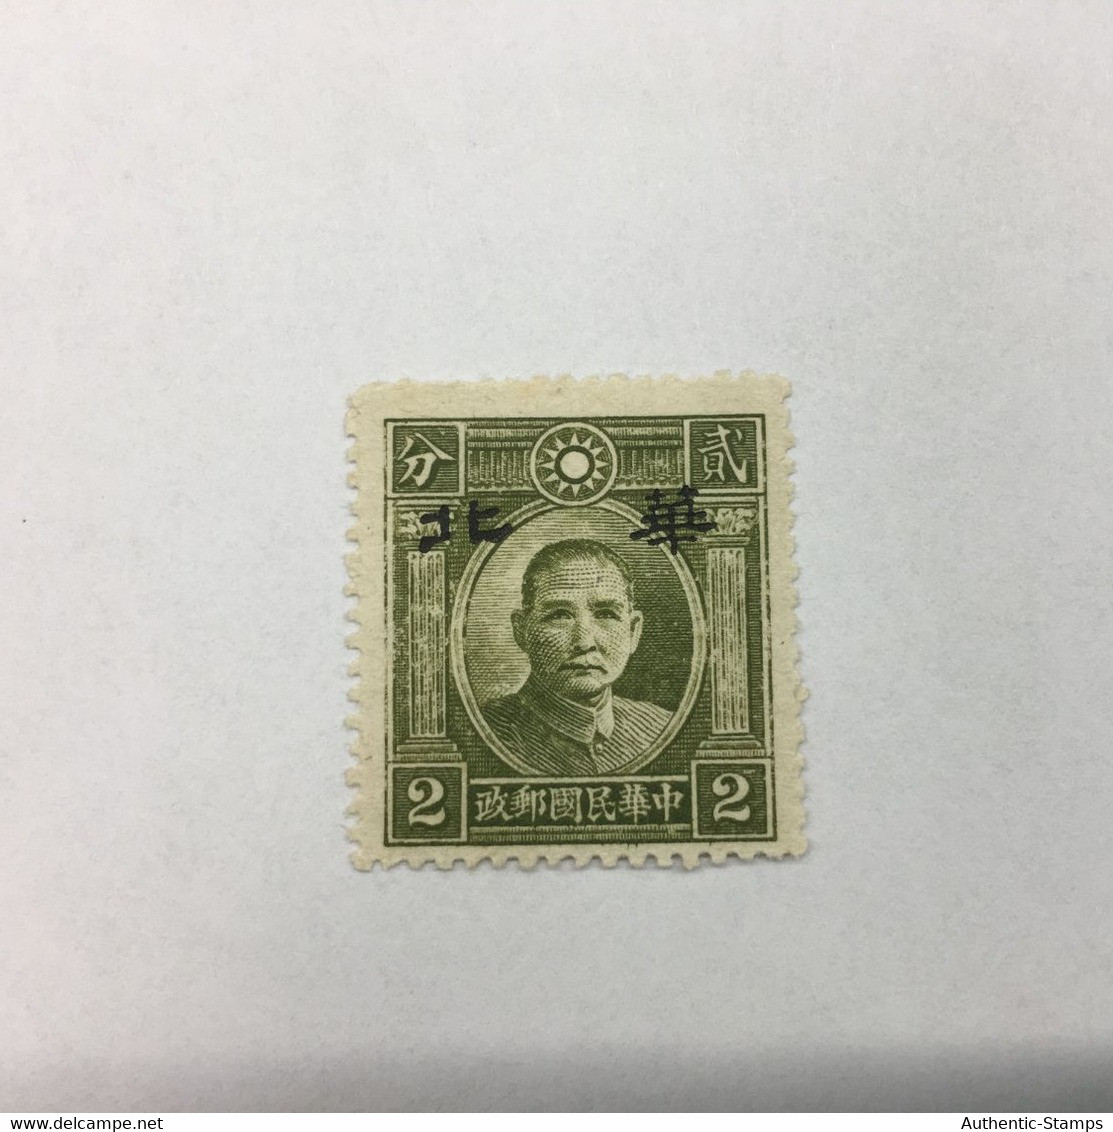 CHINA STAMP, UNUSED, TIMBRO, STEMPEL, CINA, CHINE, LIST 5809 - 1941-45 Chine Du Nord